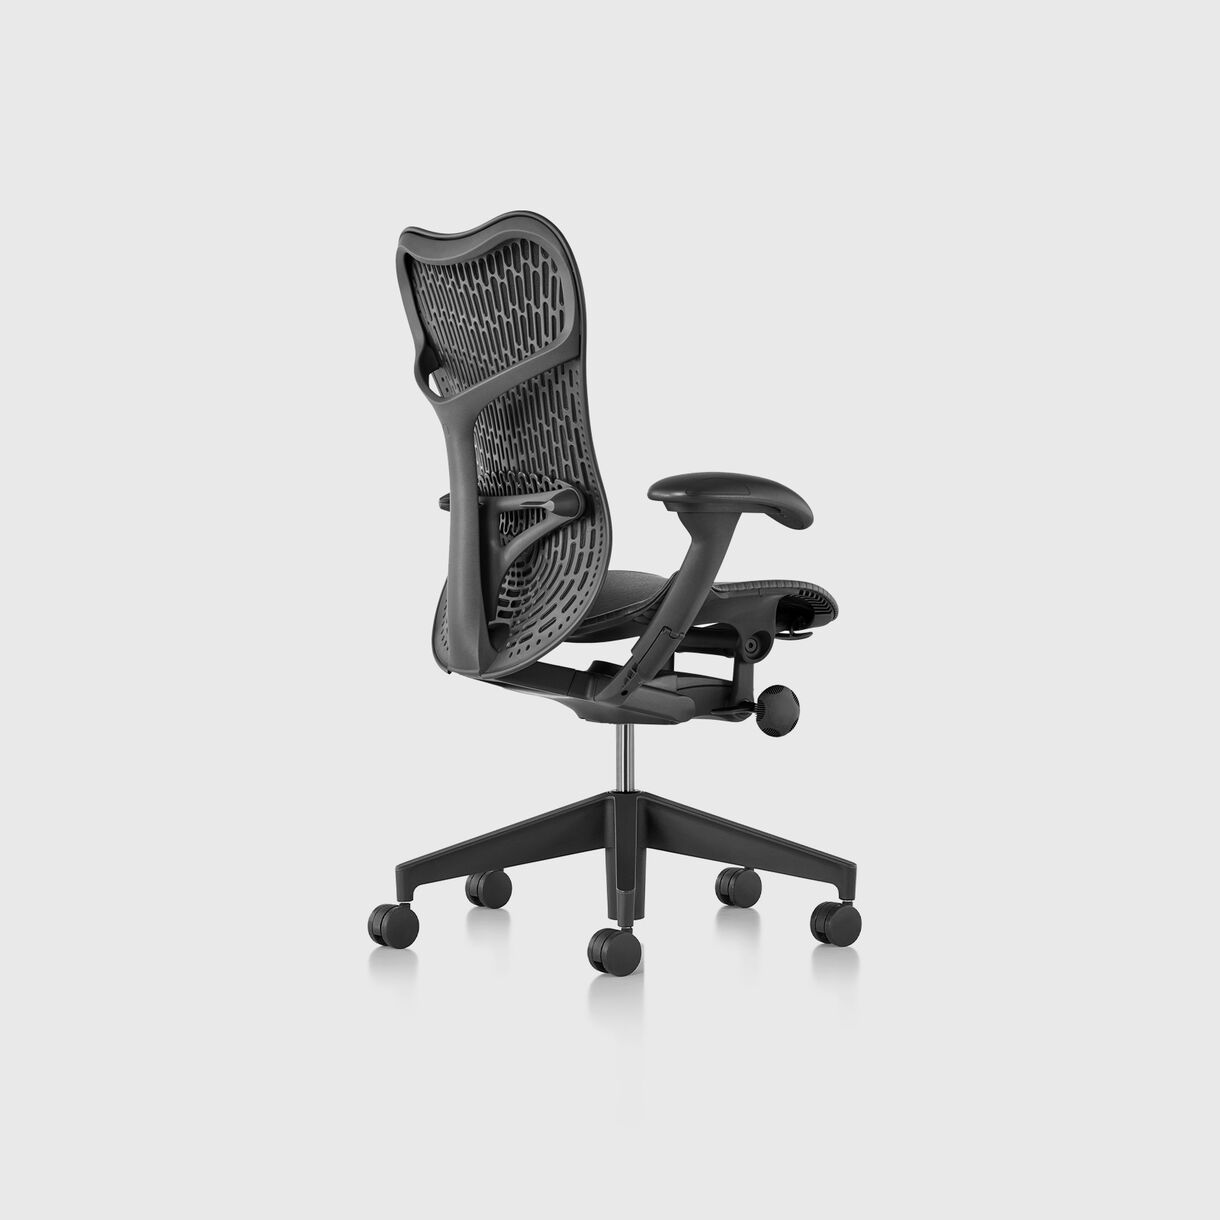 Mirra 2 Work Chair - Butterfly Suspension Graphite, Graphite Base & Frame - Adjustable Arms